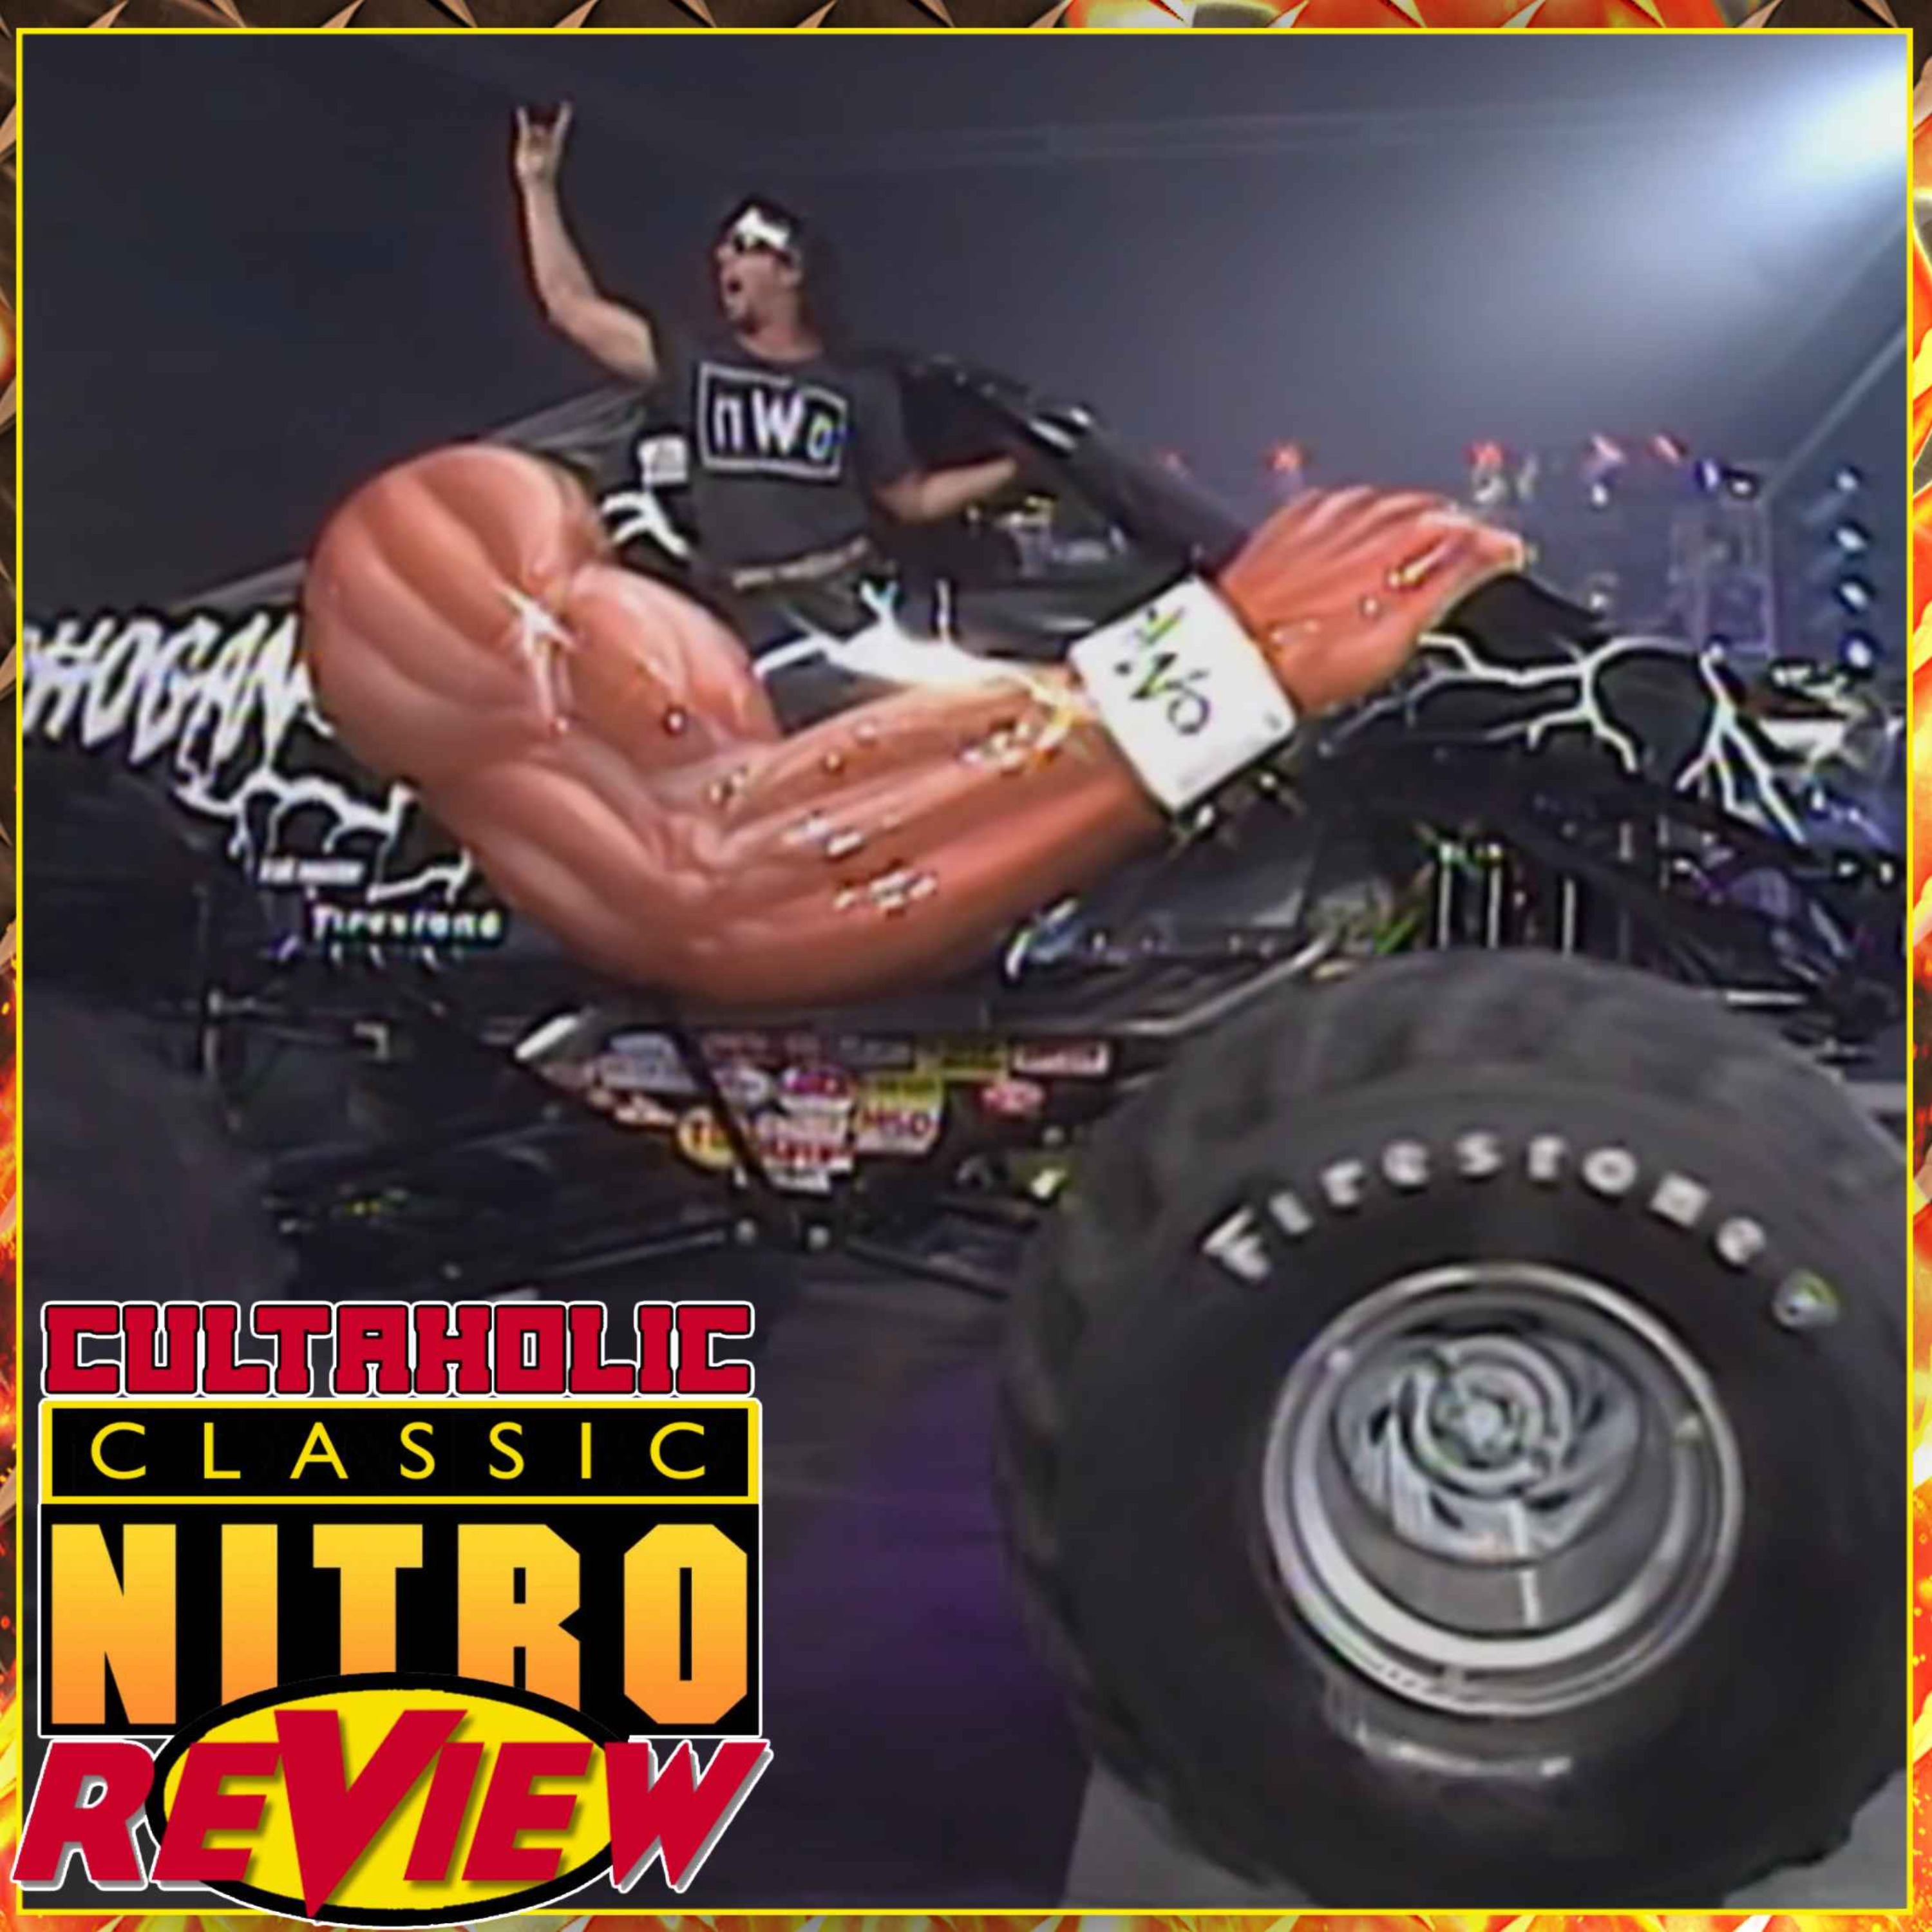 WCW Nitro #56 - The nWo continue WIPING OUT Top WCW Stars...and a MONSTER TRUCK returns!